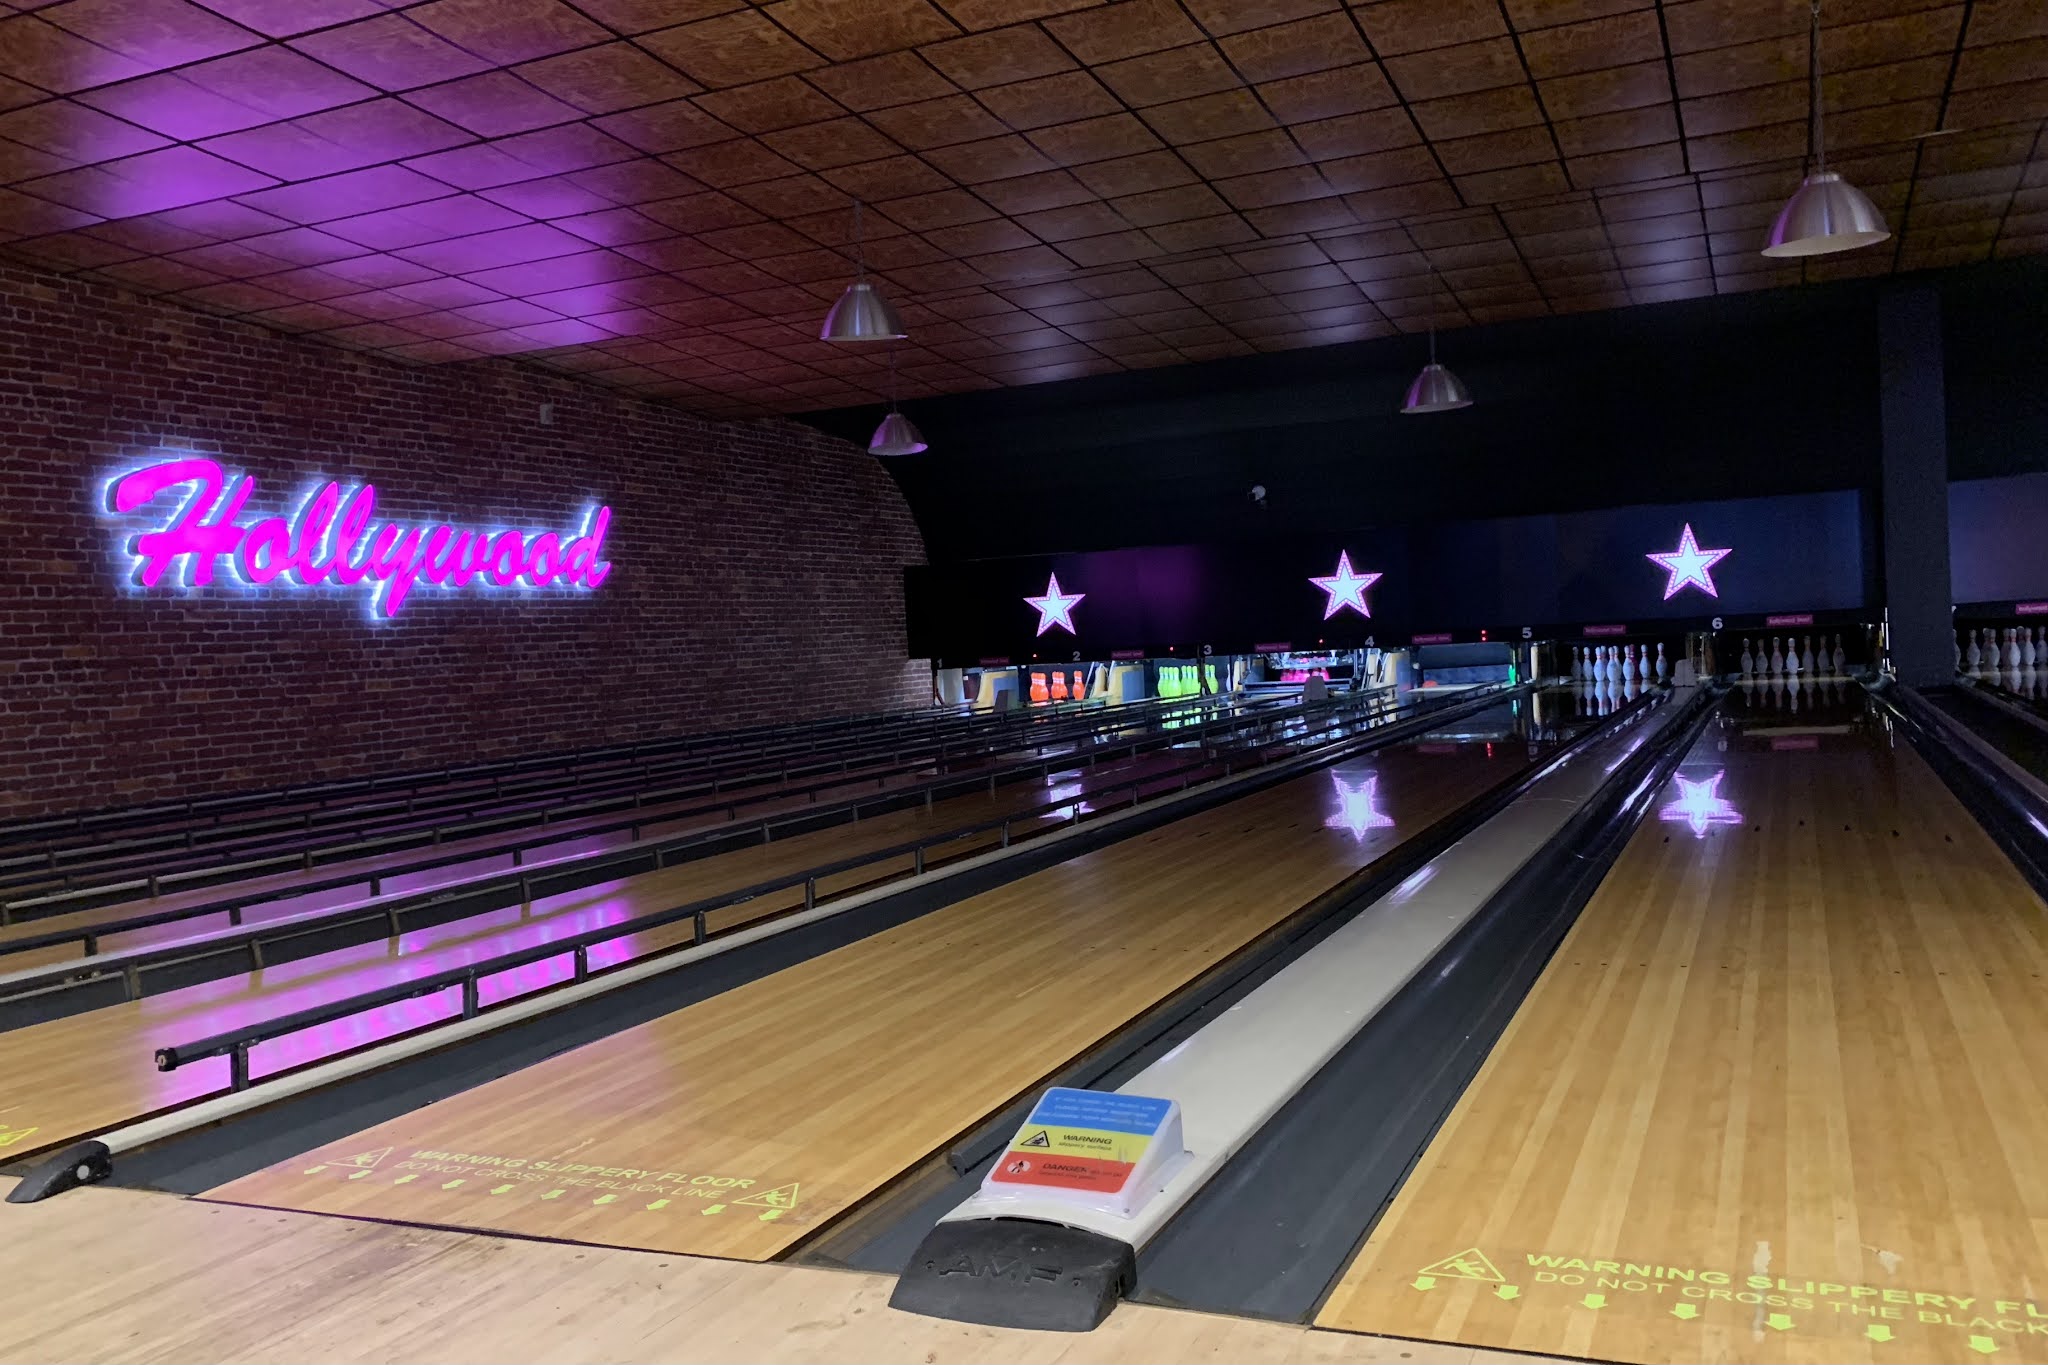 Hollywood bowl is one of the ten pin bowling alleys in Essex